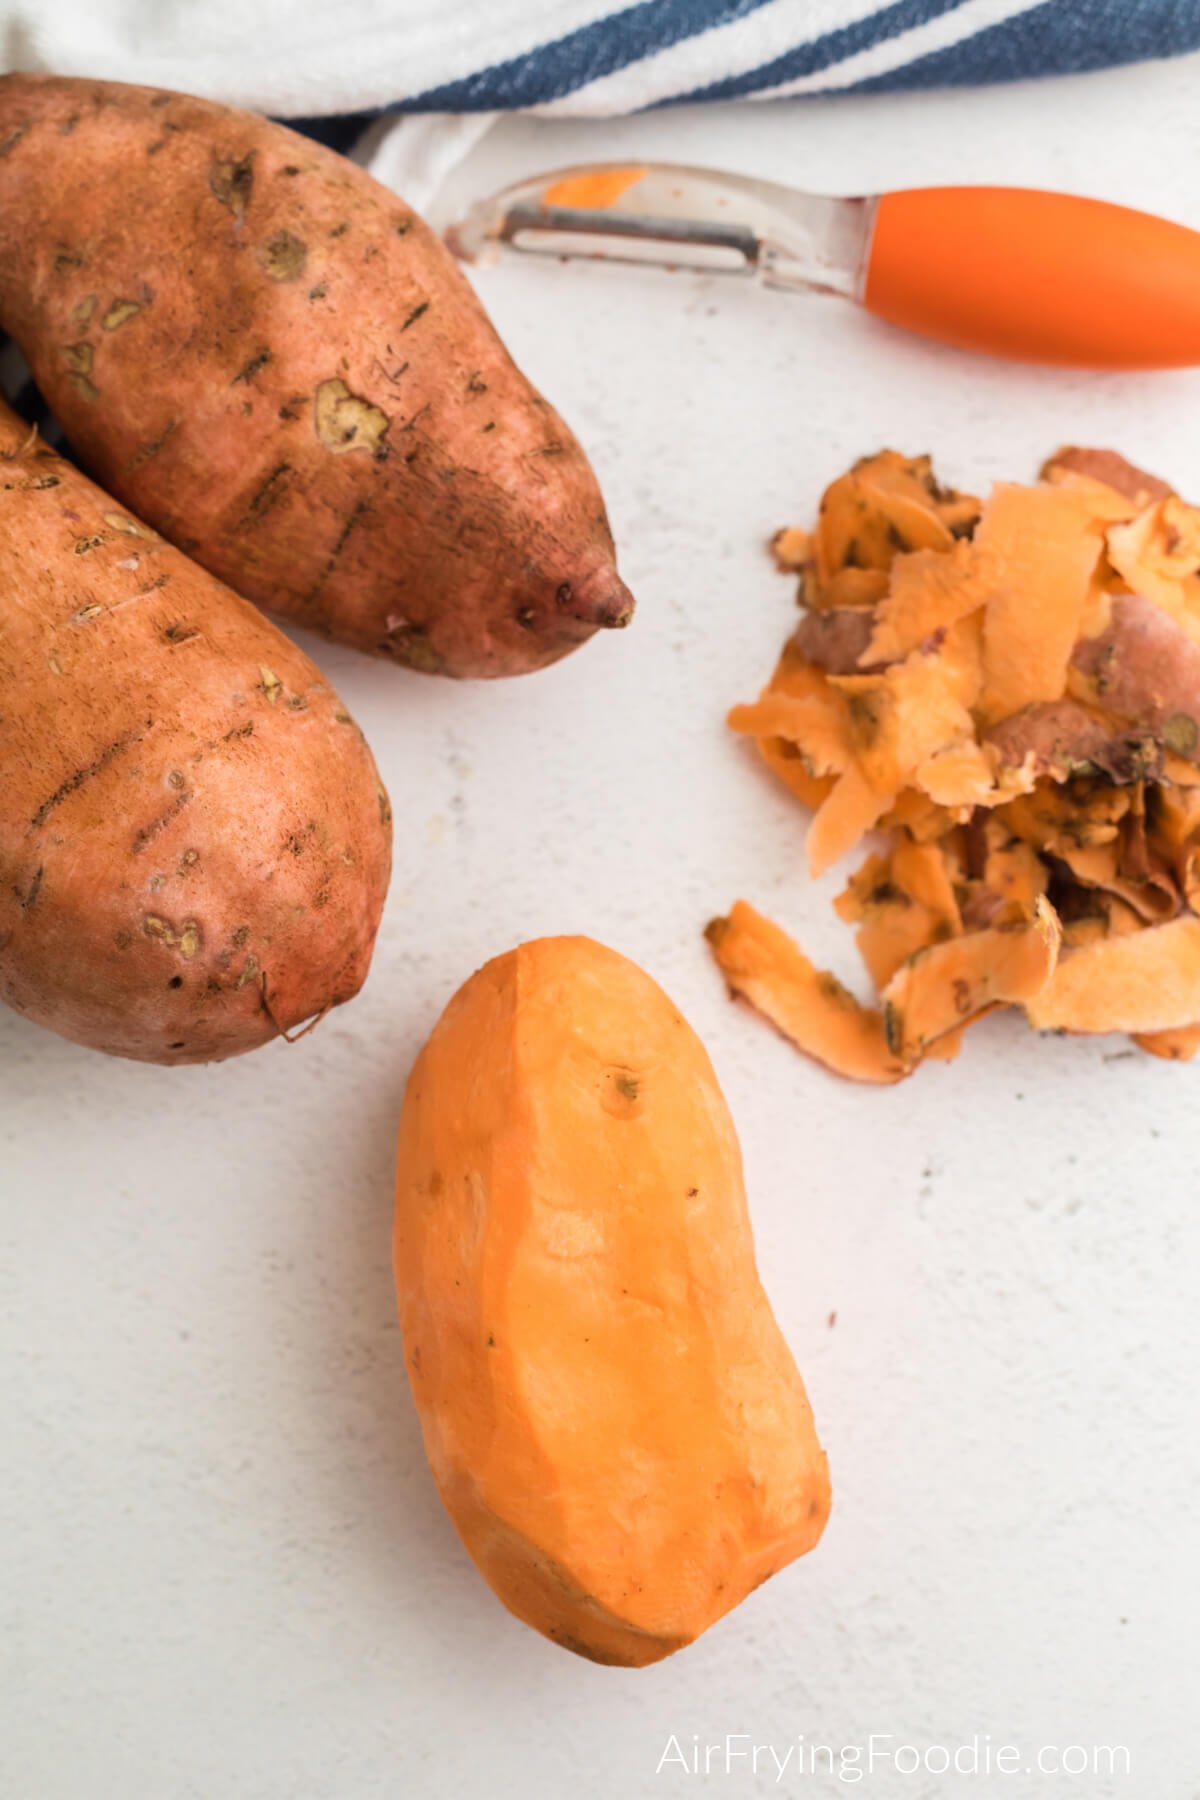 Peeled sweet potato on a table top surrounded by sweet potatoes and peelings with a vegetable peeler off to the side.